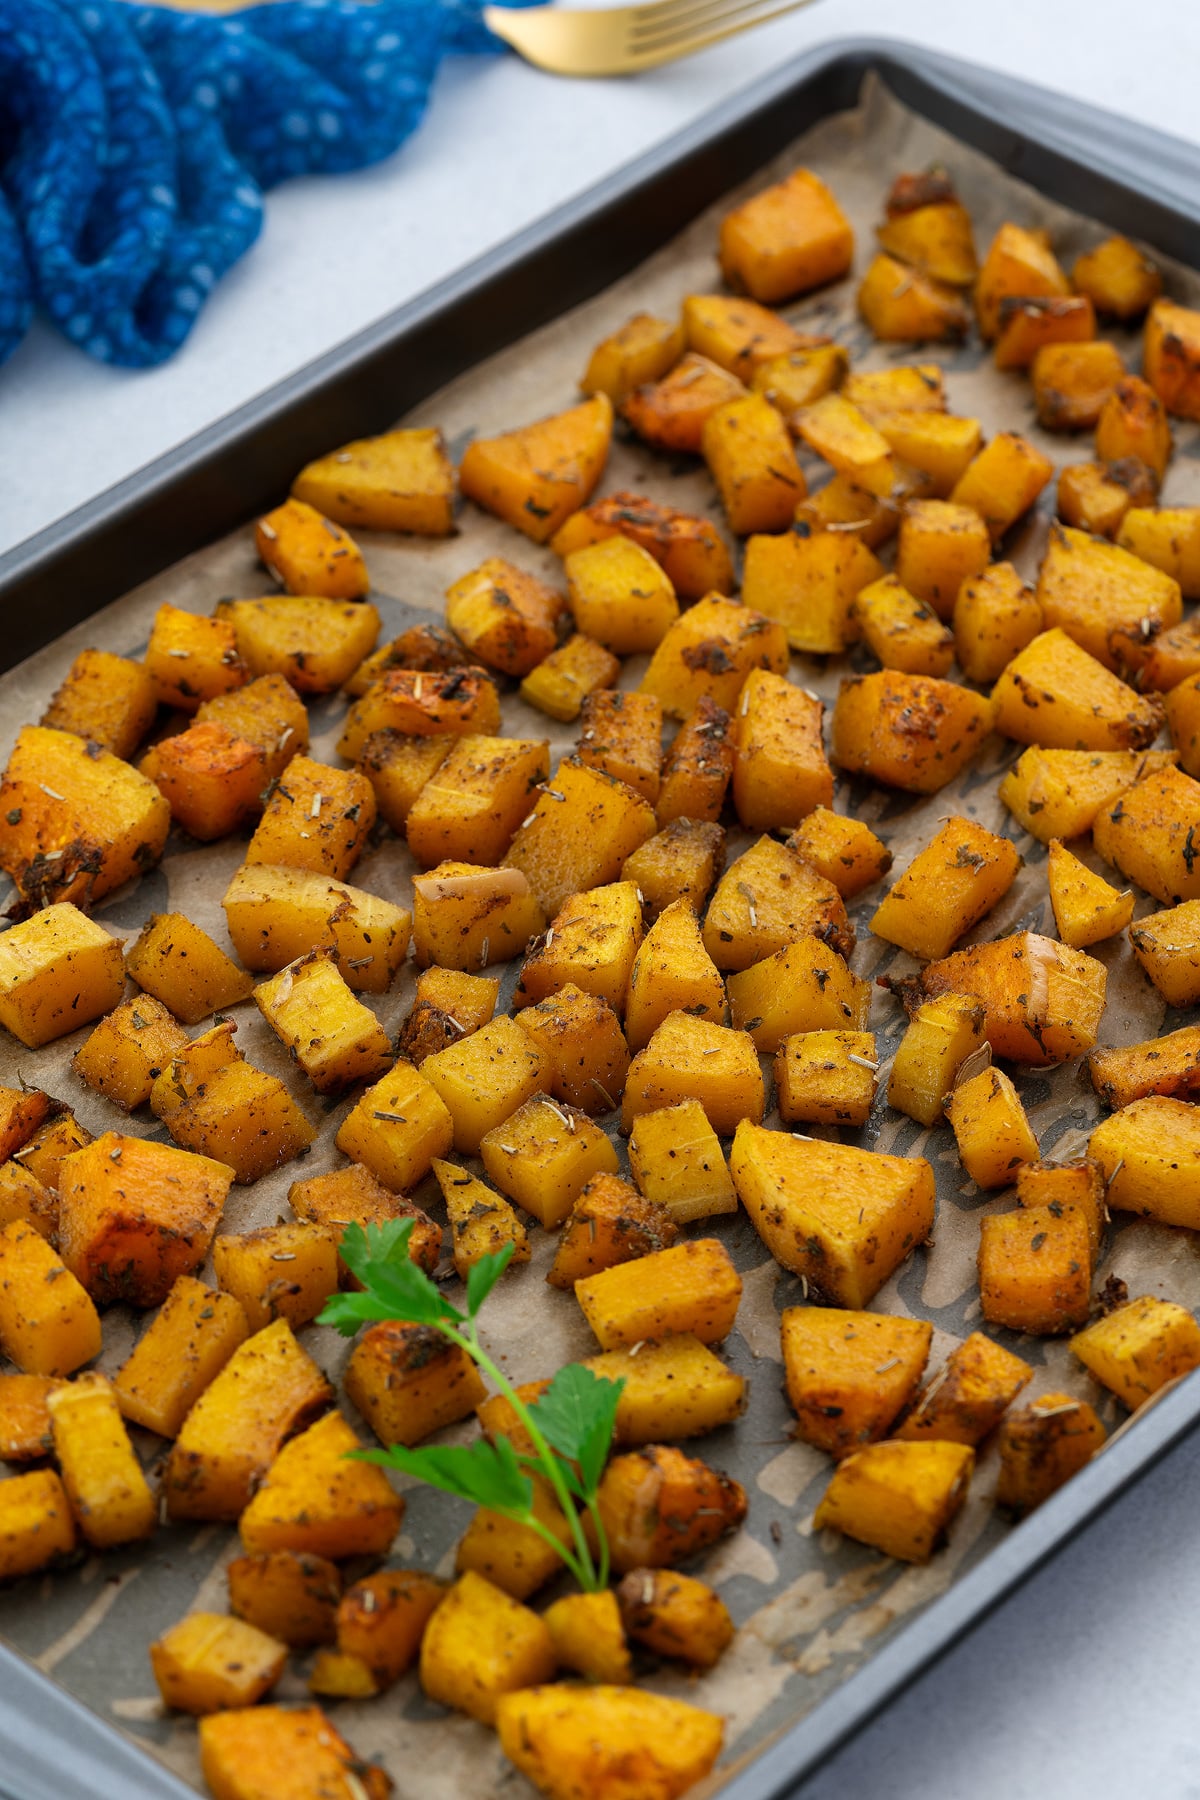 Roasted butternut squash in a baking tray, set on a white table. A fork and a blue towel are neatly placed next to the tray.